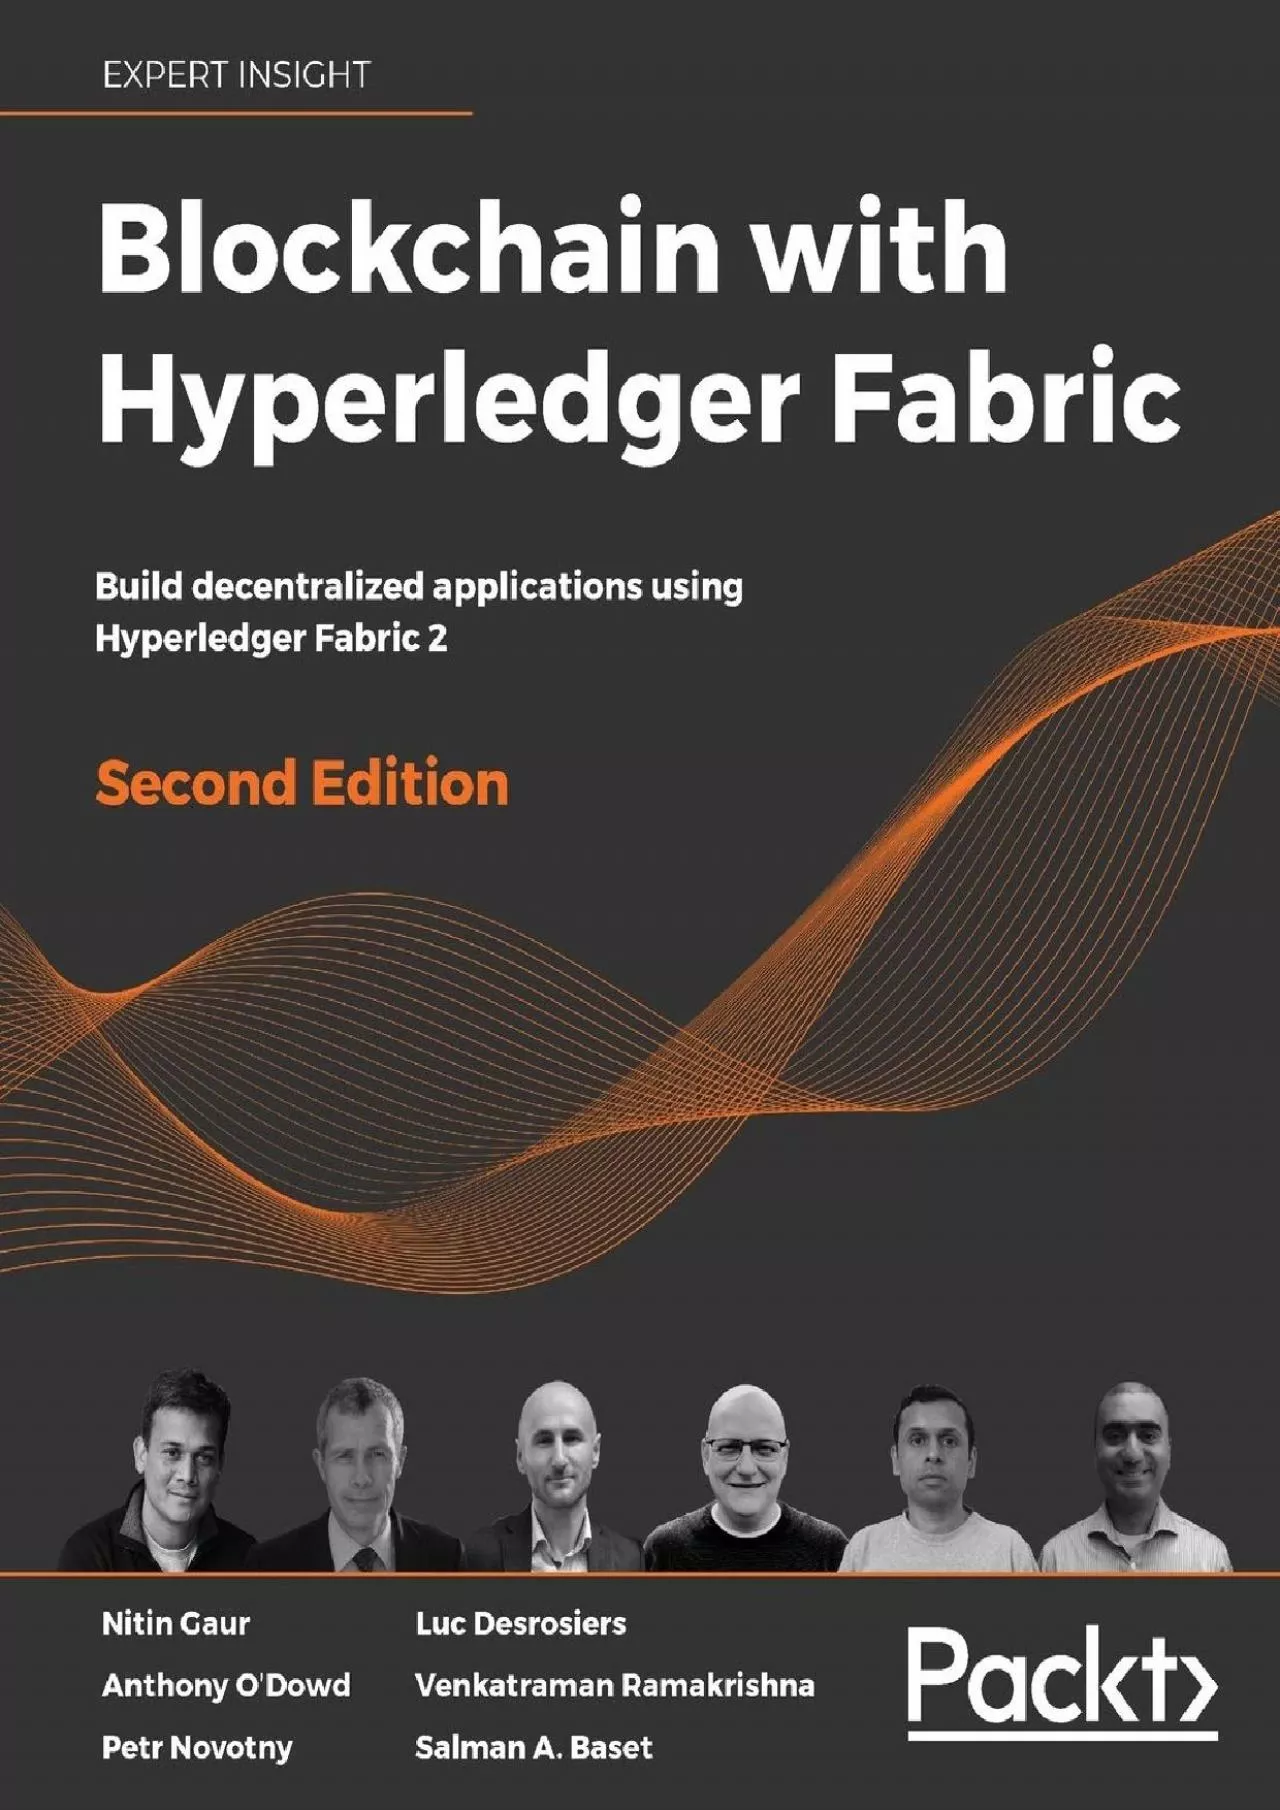 (BOOK)-Blockchain with Hyperledger Fabric: Build decentralized applications using Hyperledger